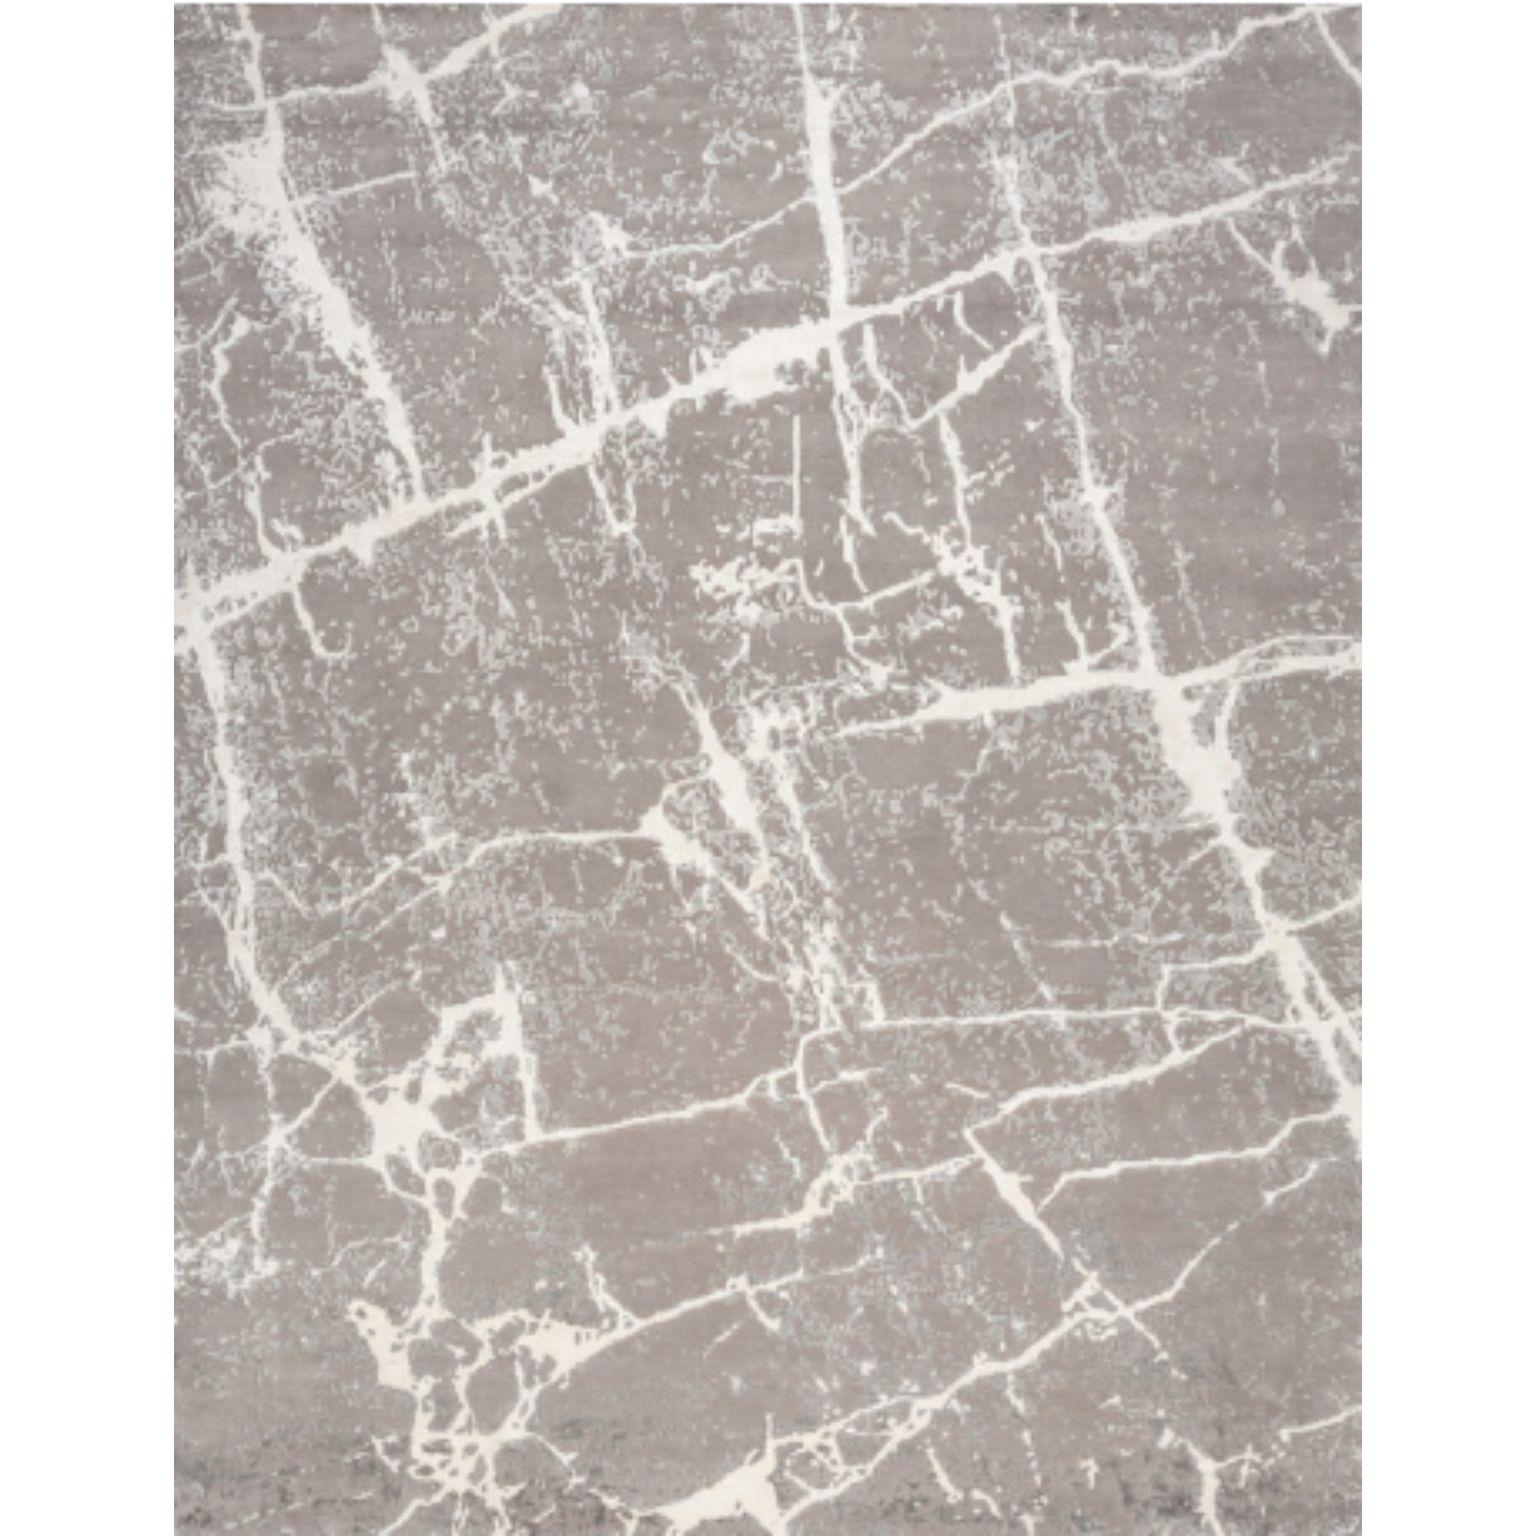 KINTSUGI 200 Rug by Illulian
Dimensions: D300 x H200 cm 
Materials: Wool 50%, Silk 50%
Variations available and prices may vary according to materials and sizes. Please contact us.

Illulian, historic and prestigious rug company brand,